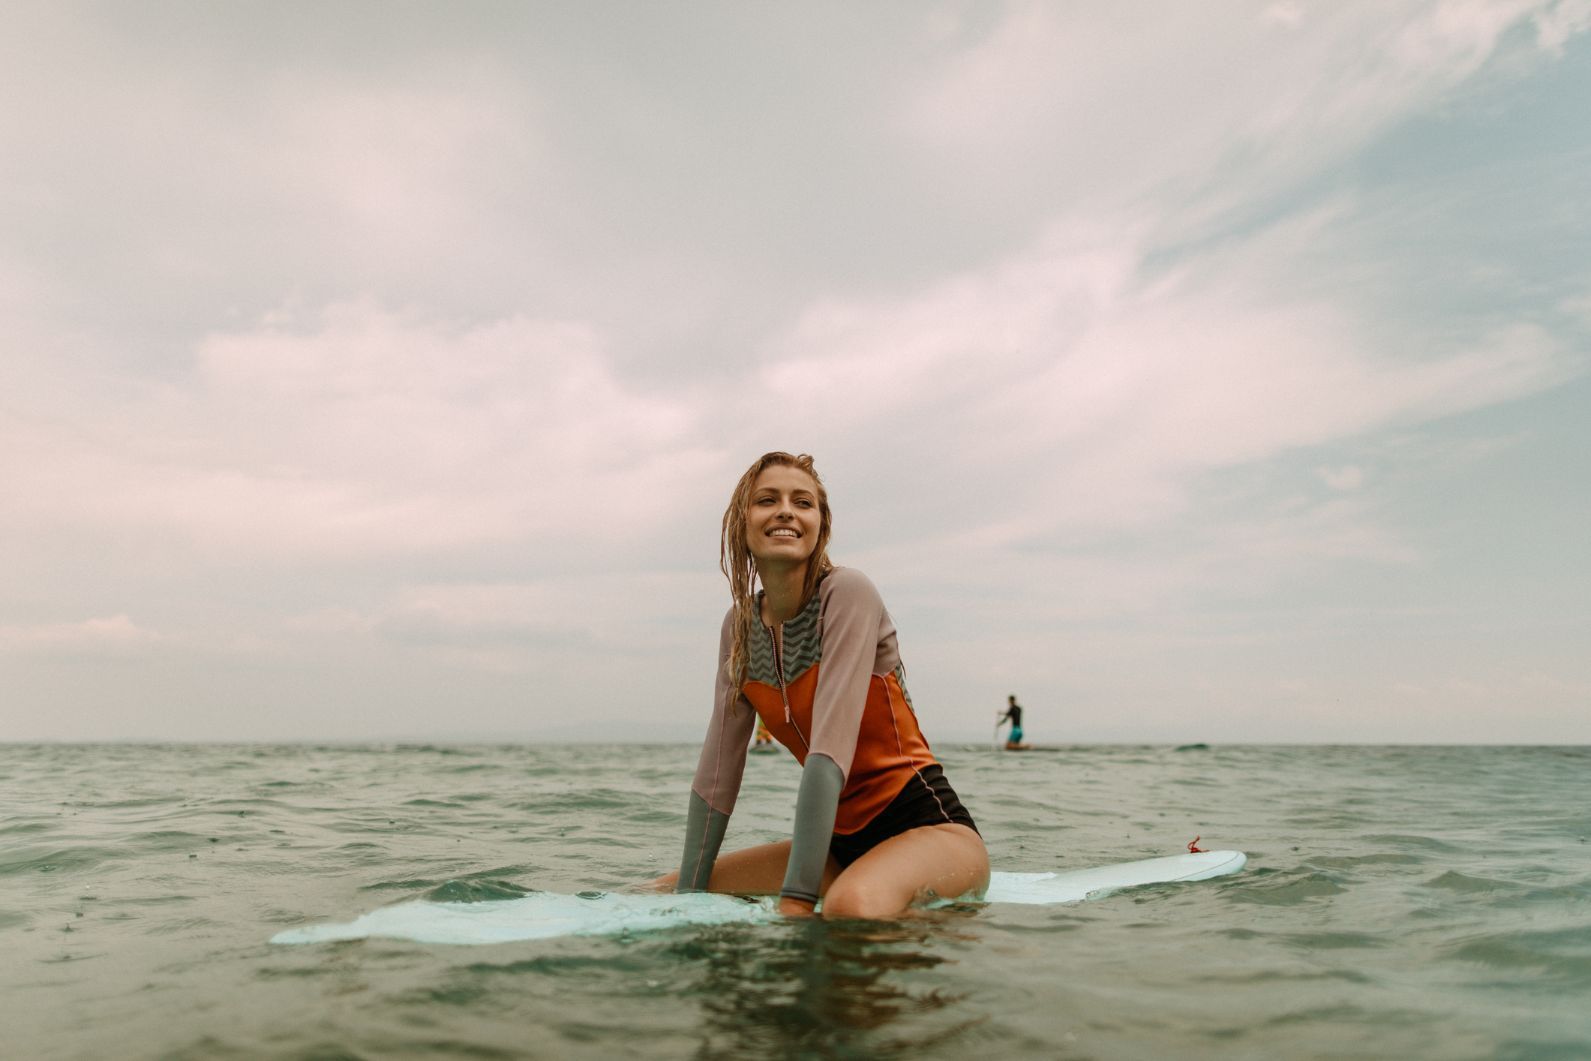 A smiling woman sits on a surfboard in the sea.